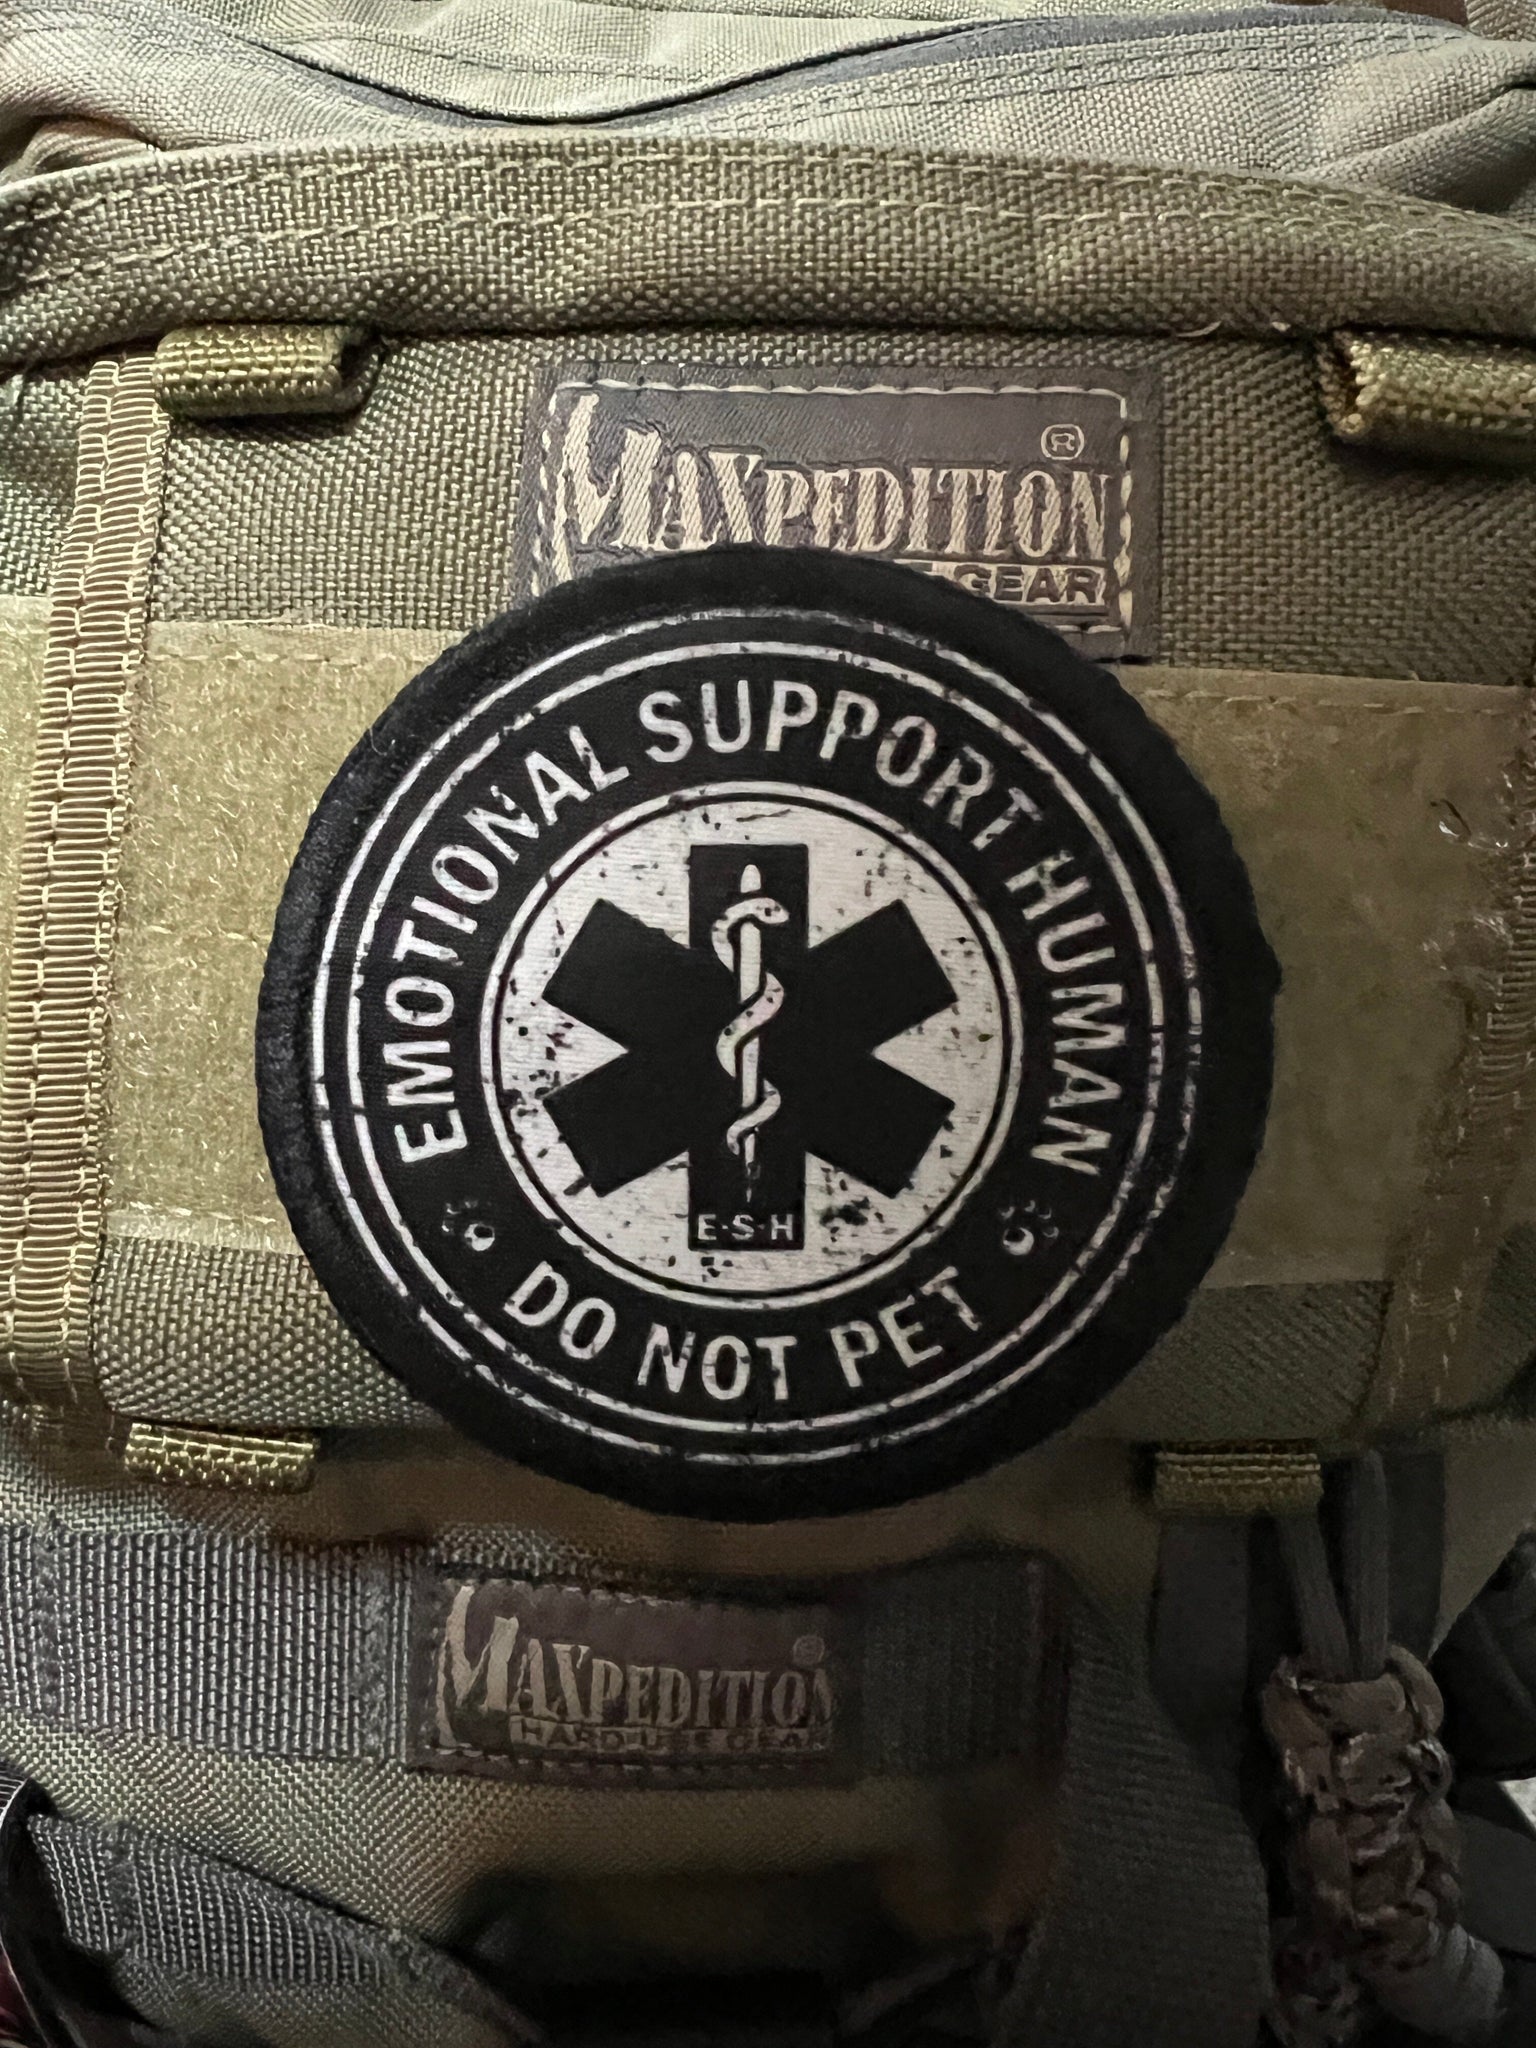 Emotional support human do not pet funny velcro morale patch